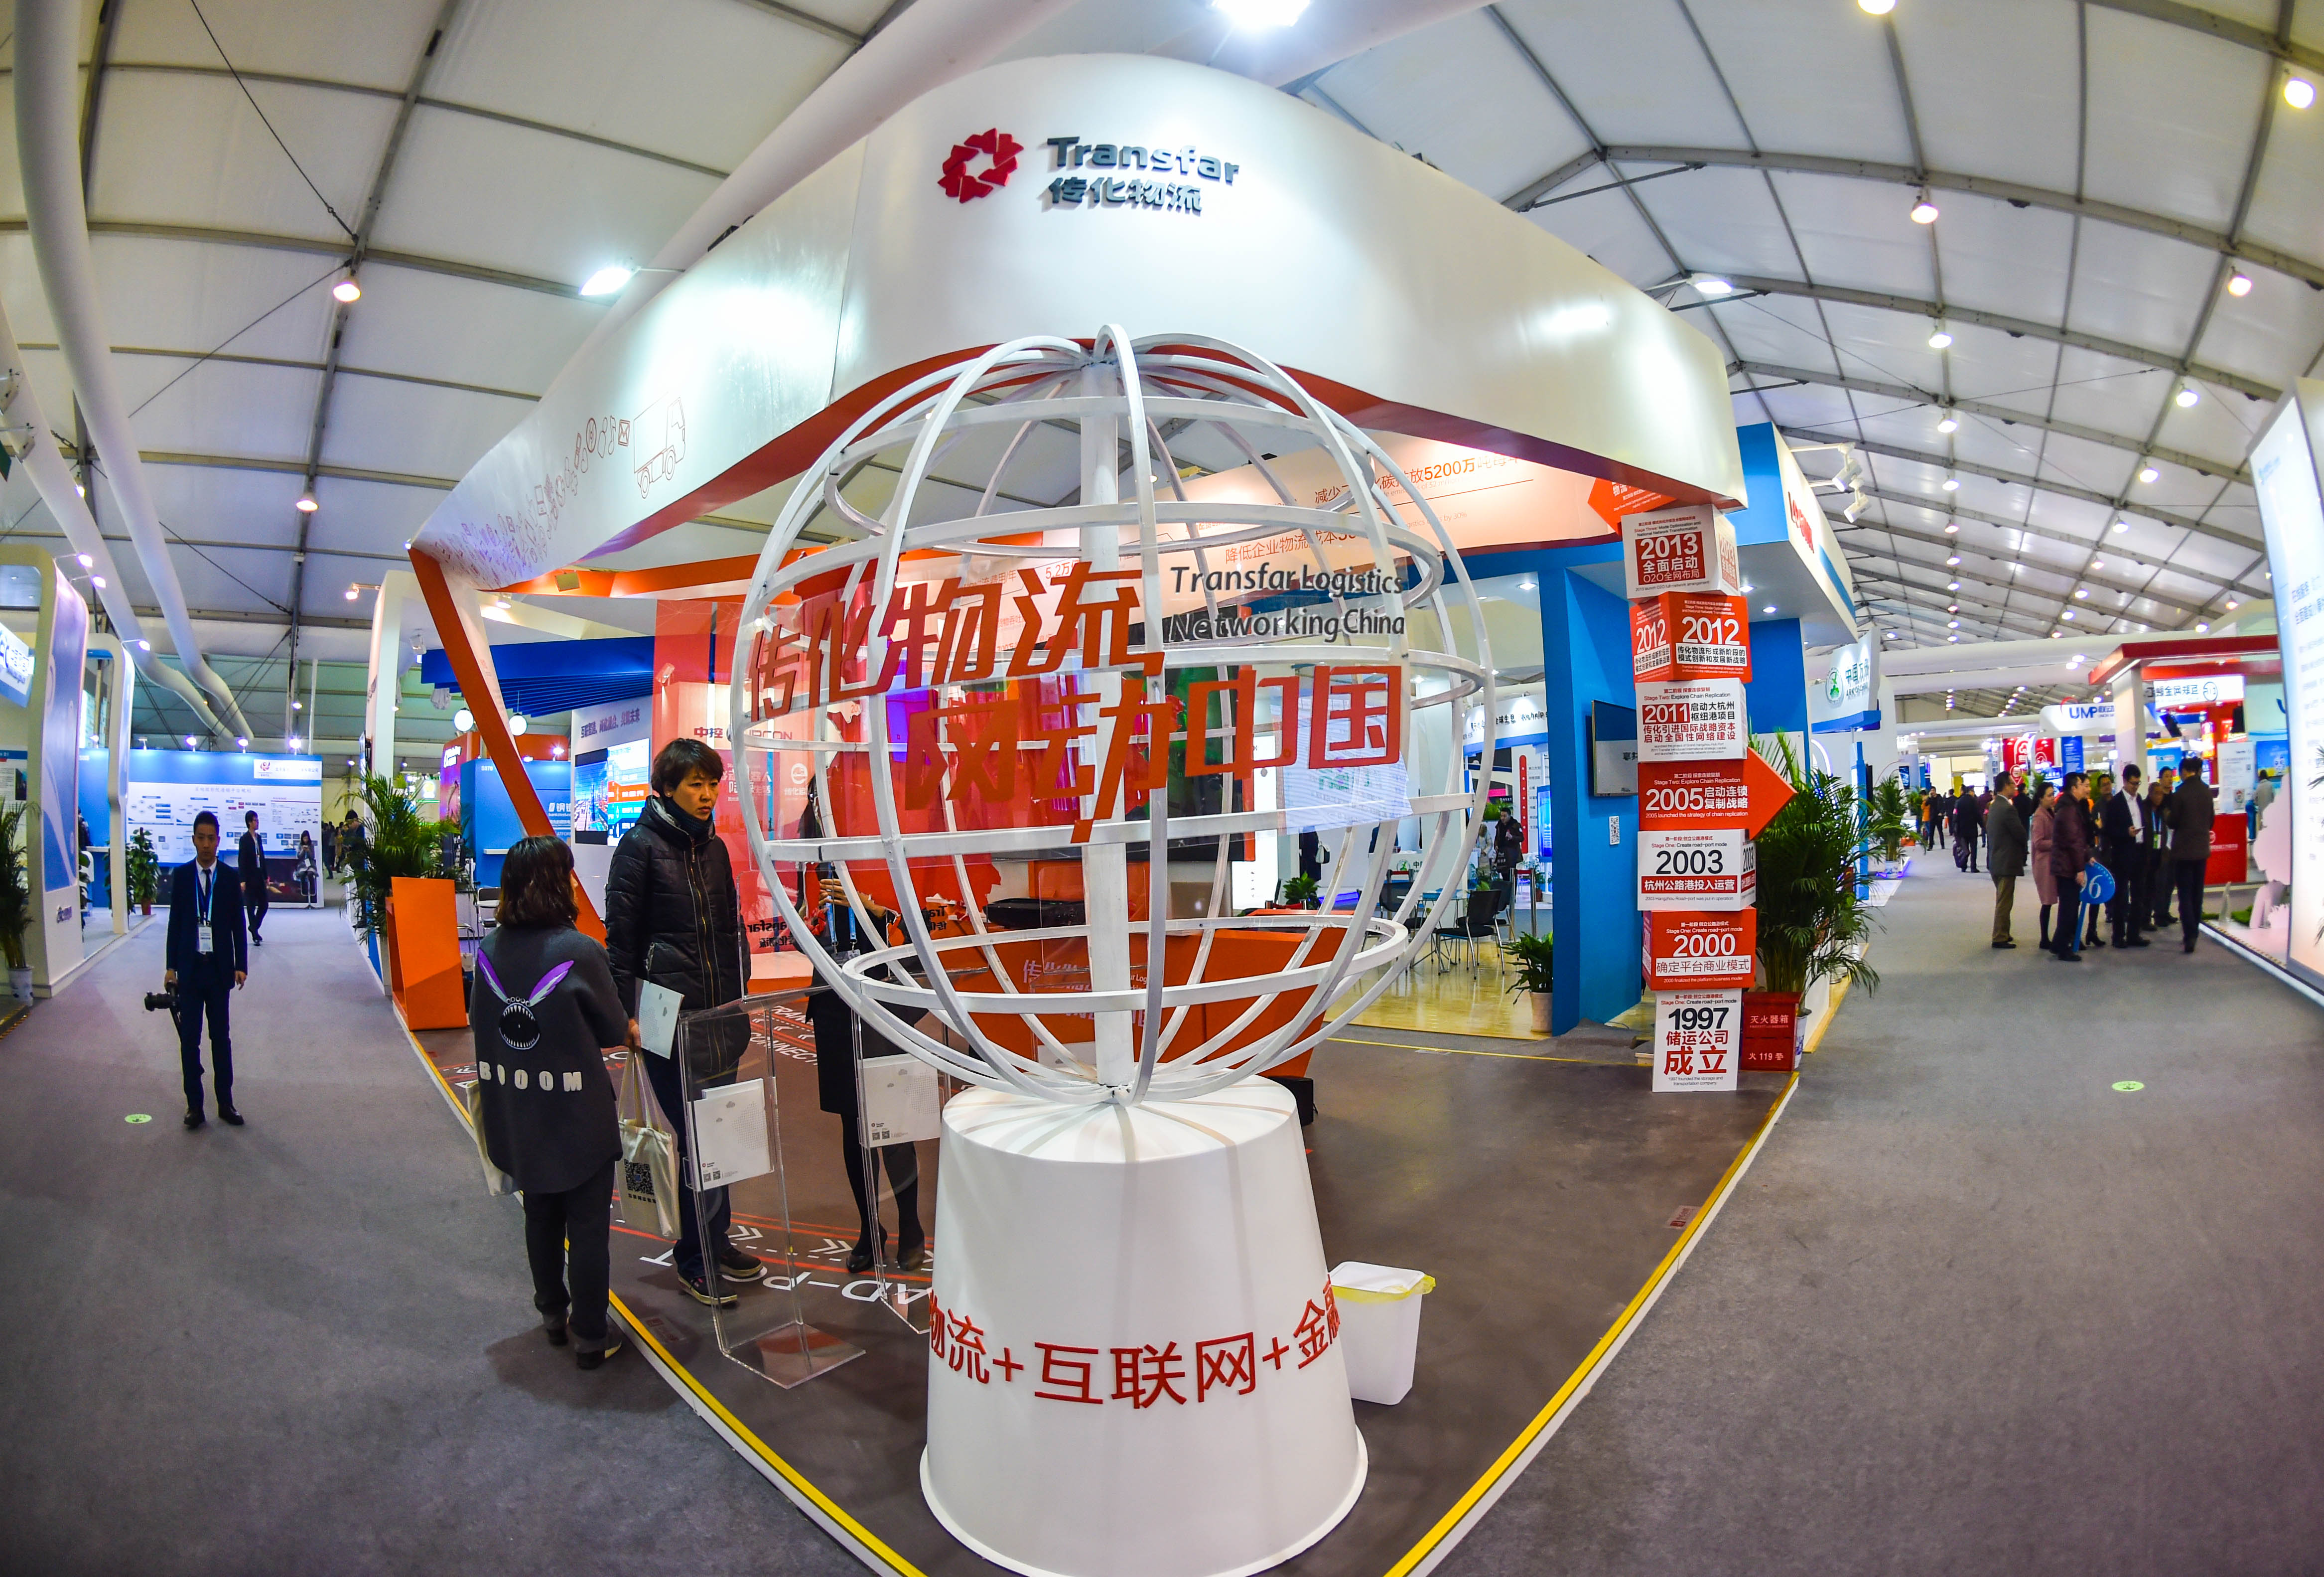 (151215) -- TONGXIANG, Dec. 15, 2015 (Xinhua) -- People visit the exhibition of Transfar Logistics Company at the Light of the Internet Expo in Wuzhen Township, east China's Zhejiang Province, Dec. 15, 2015. The expo opened here Tuesday as part of the 2nd World Internet Conference, which will be held between Dec. 16 and 18. (Xinhua/Xu Yu) (ry)